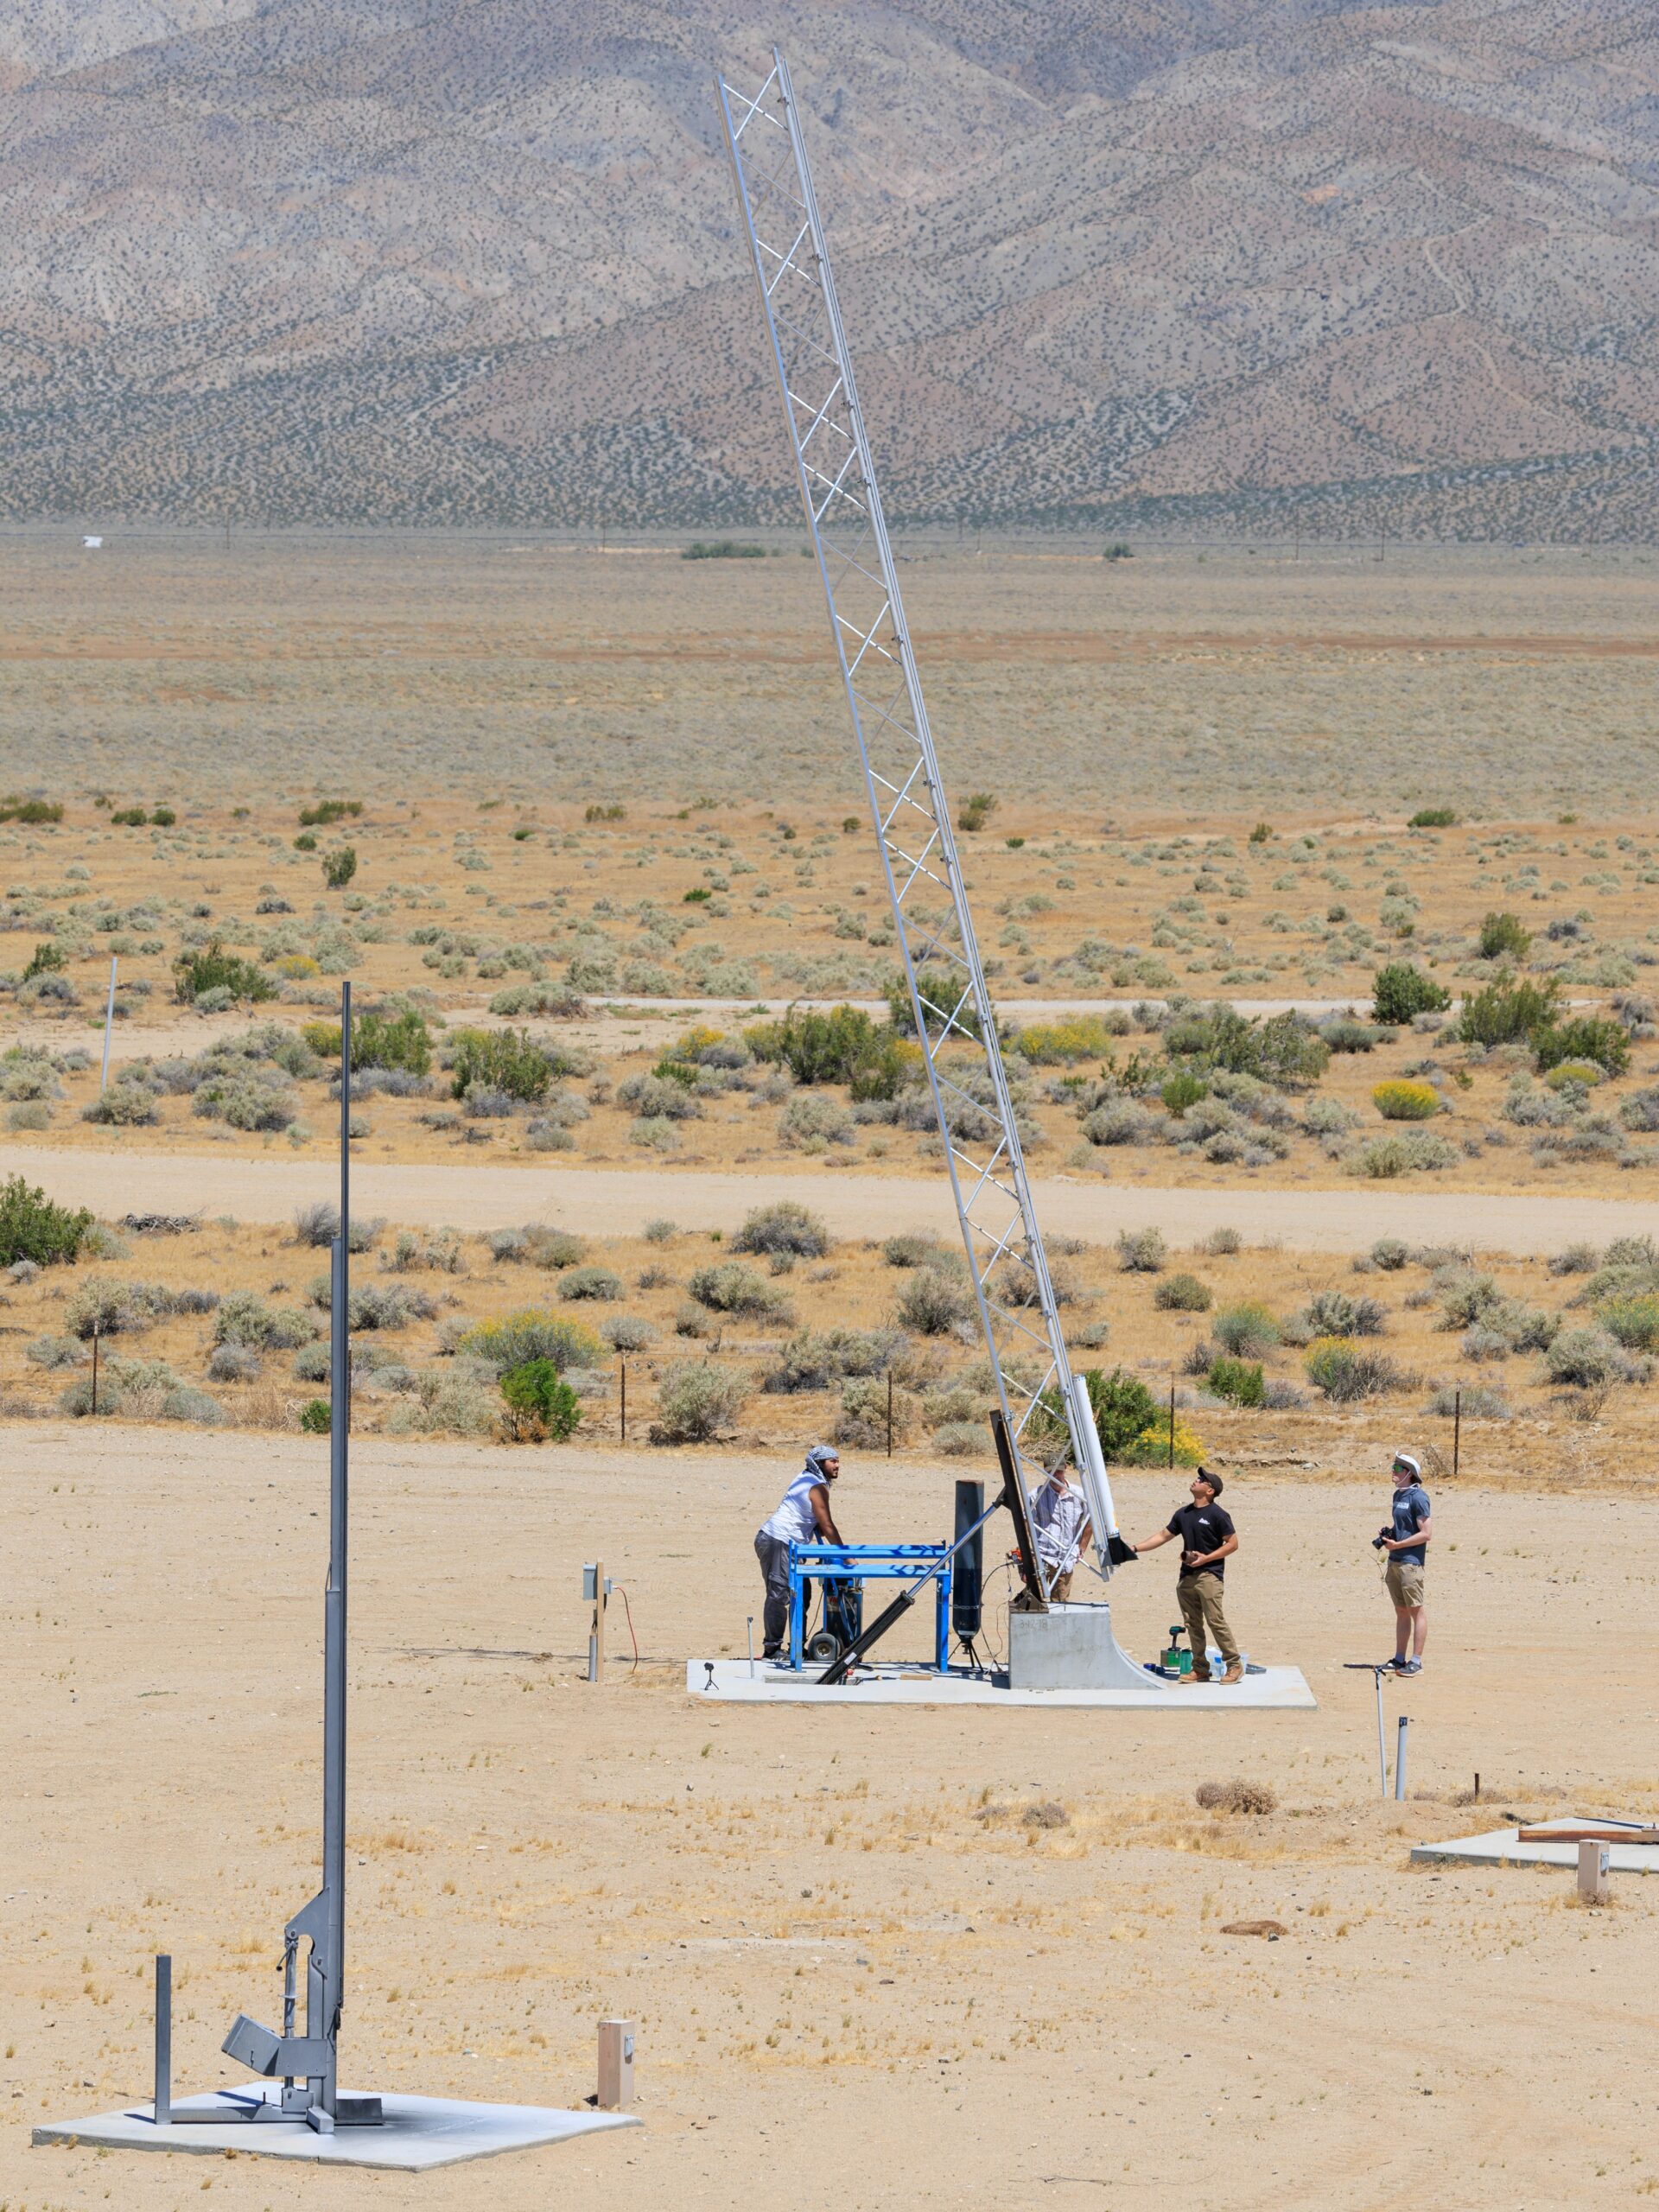 Let it Loose members raise their rocket on the launch rail in the Mojave Desert